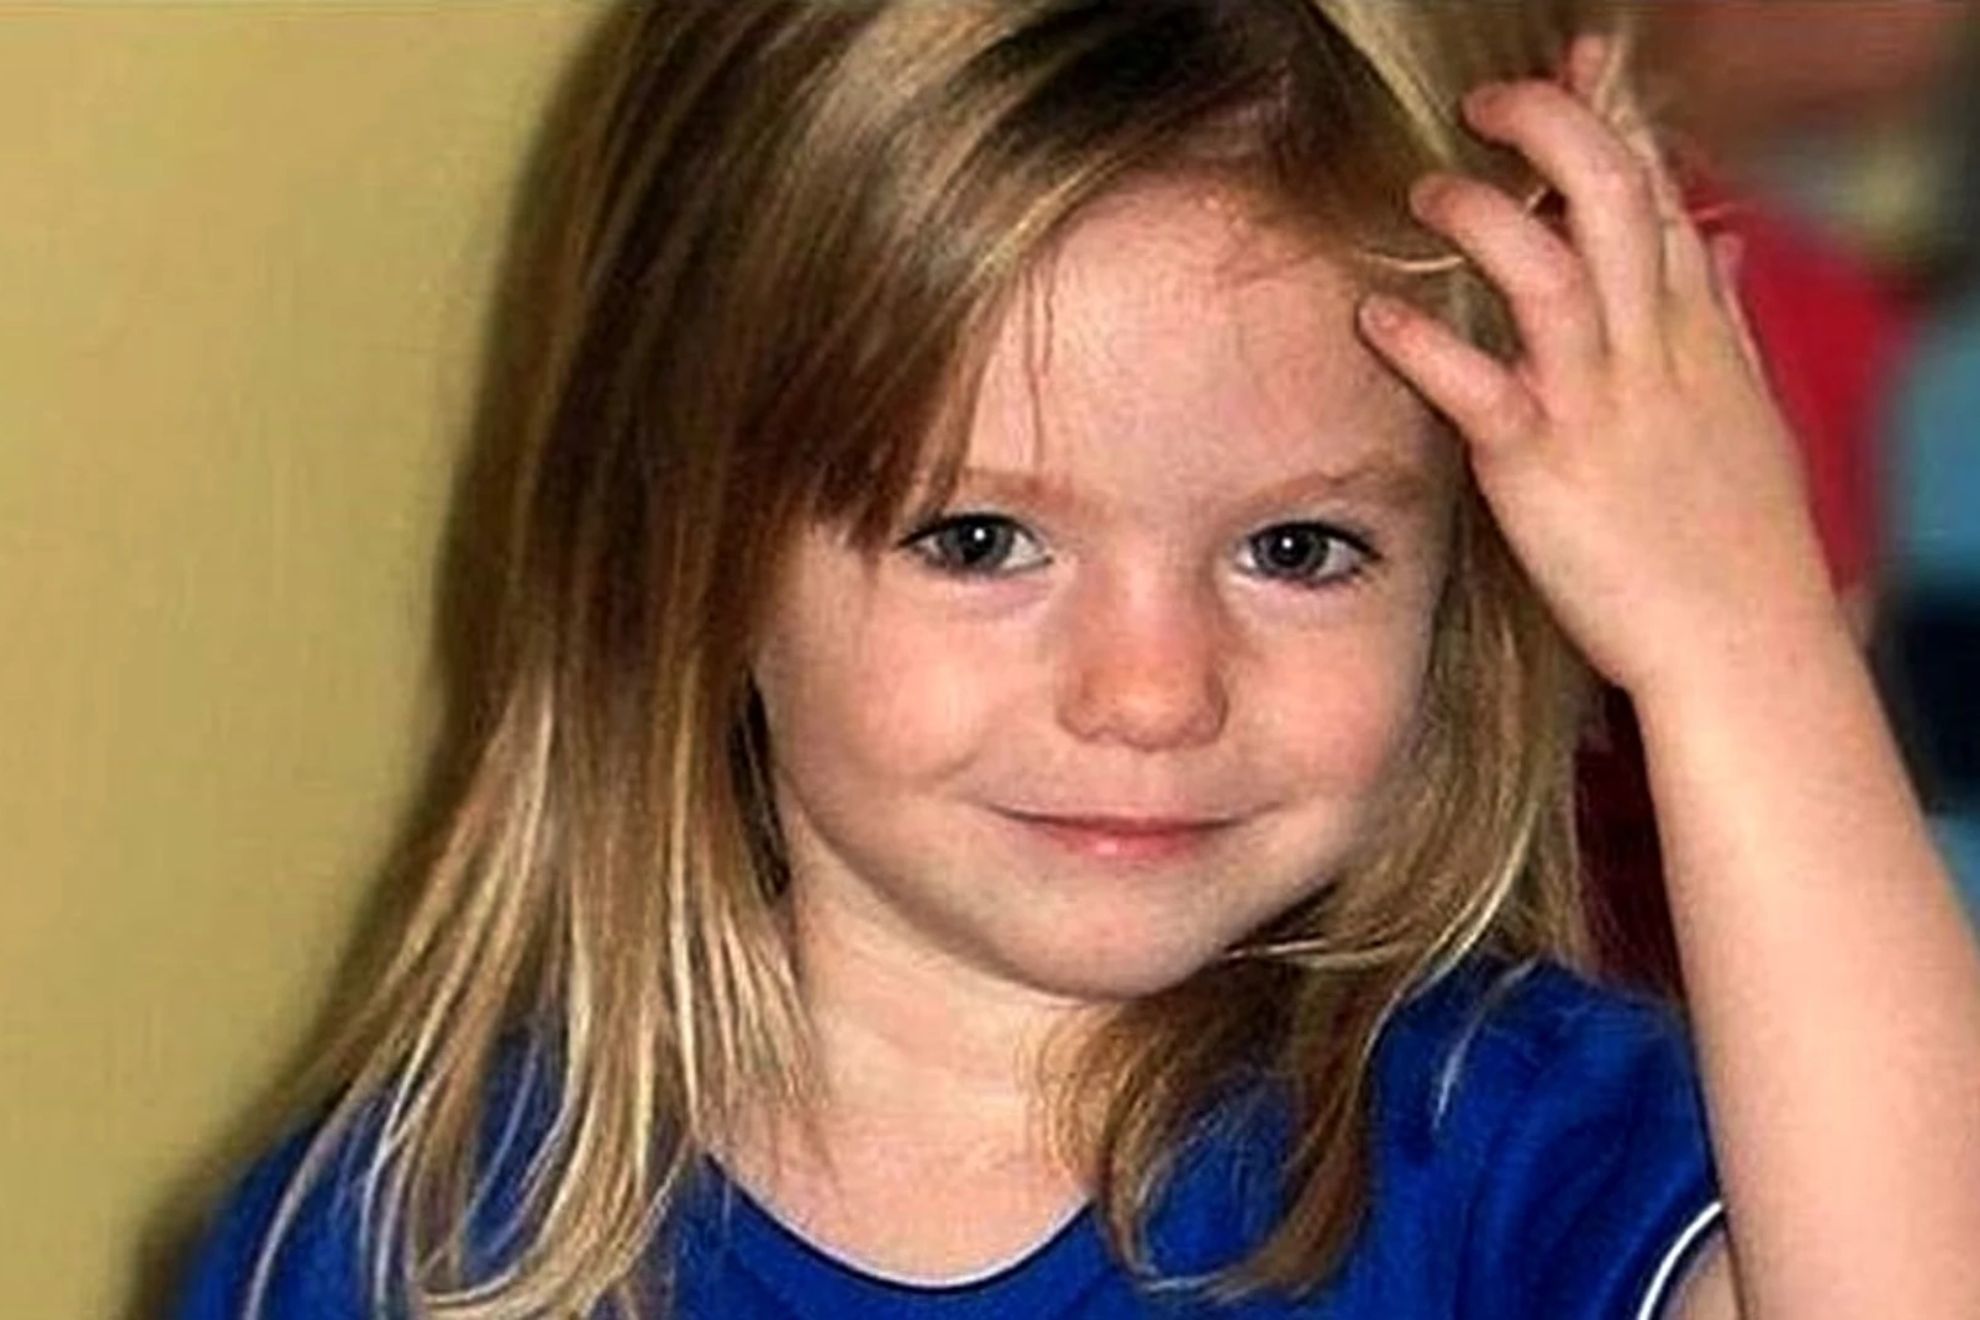 A key witness in the Madeleine McCann case breaks his silence: Brueckner told me that the girl did not scream